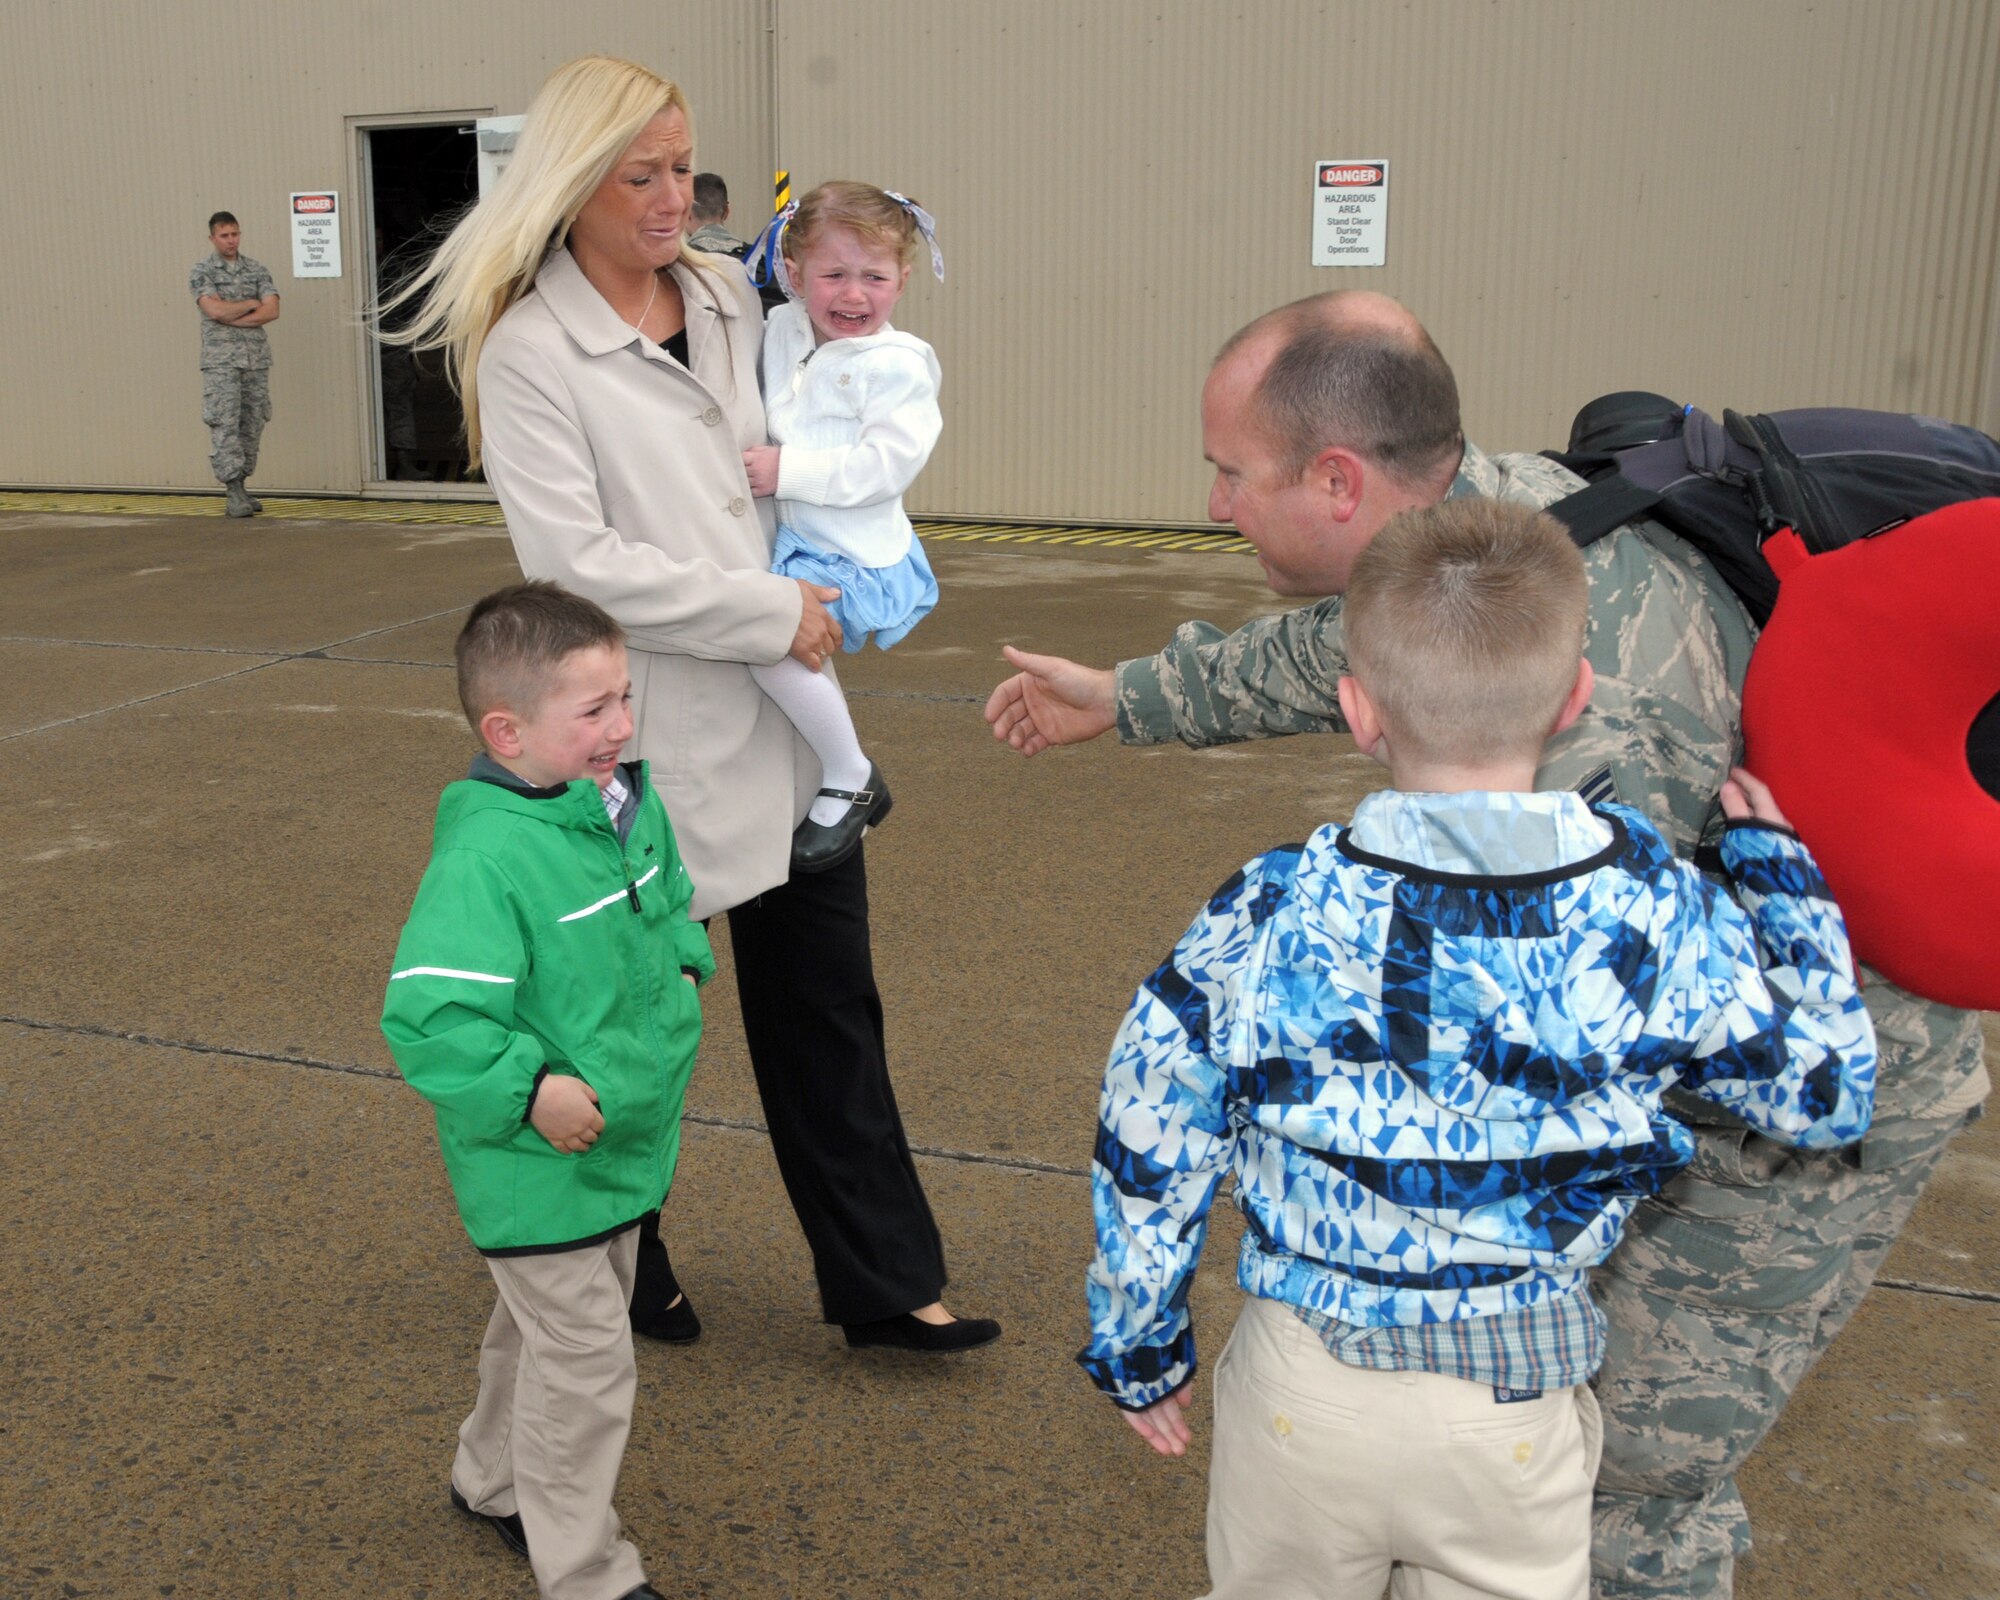 Nothing but tears of joy awaits this 914th Airlift Wing member at the Niagara Falls Air Reserve Station, N.Y. May 19, 2014. Mom and kids missed dad who was deployed overseas and is now finally home. (U.S. Air Force photo by Peter Borys) 